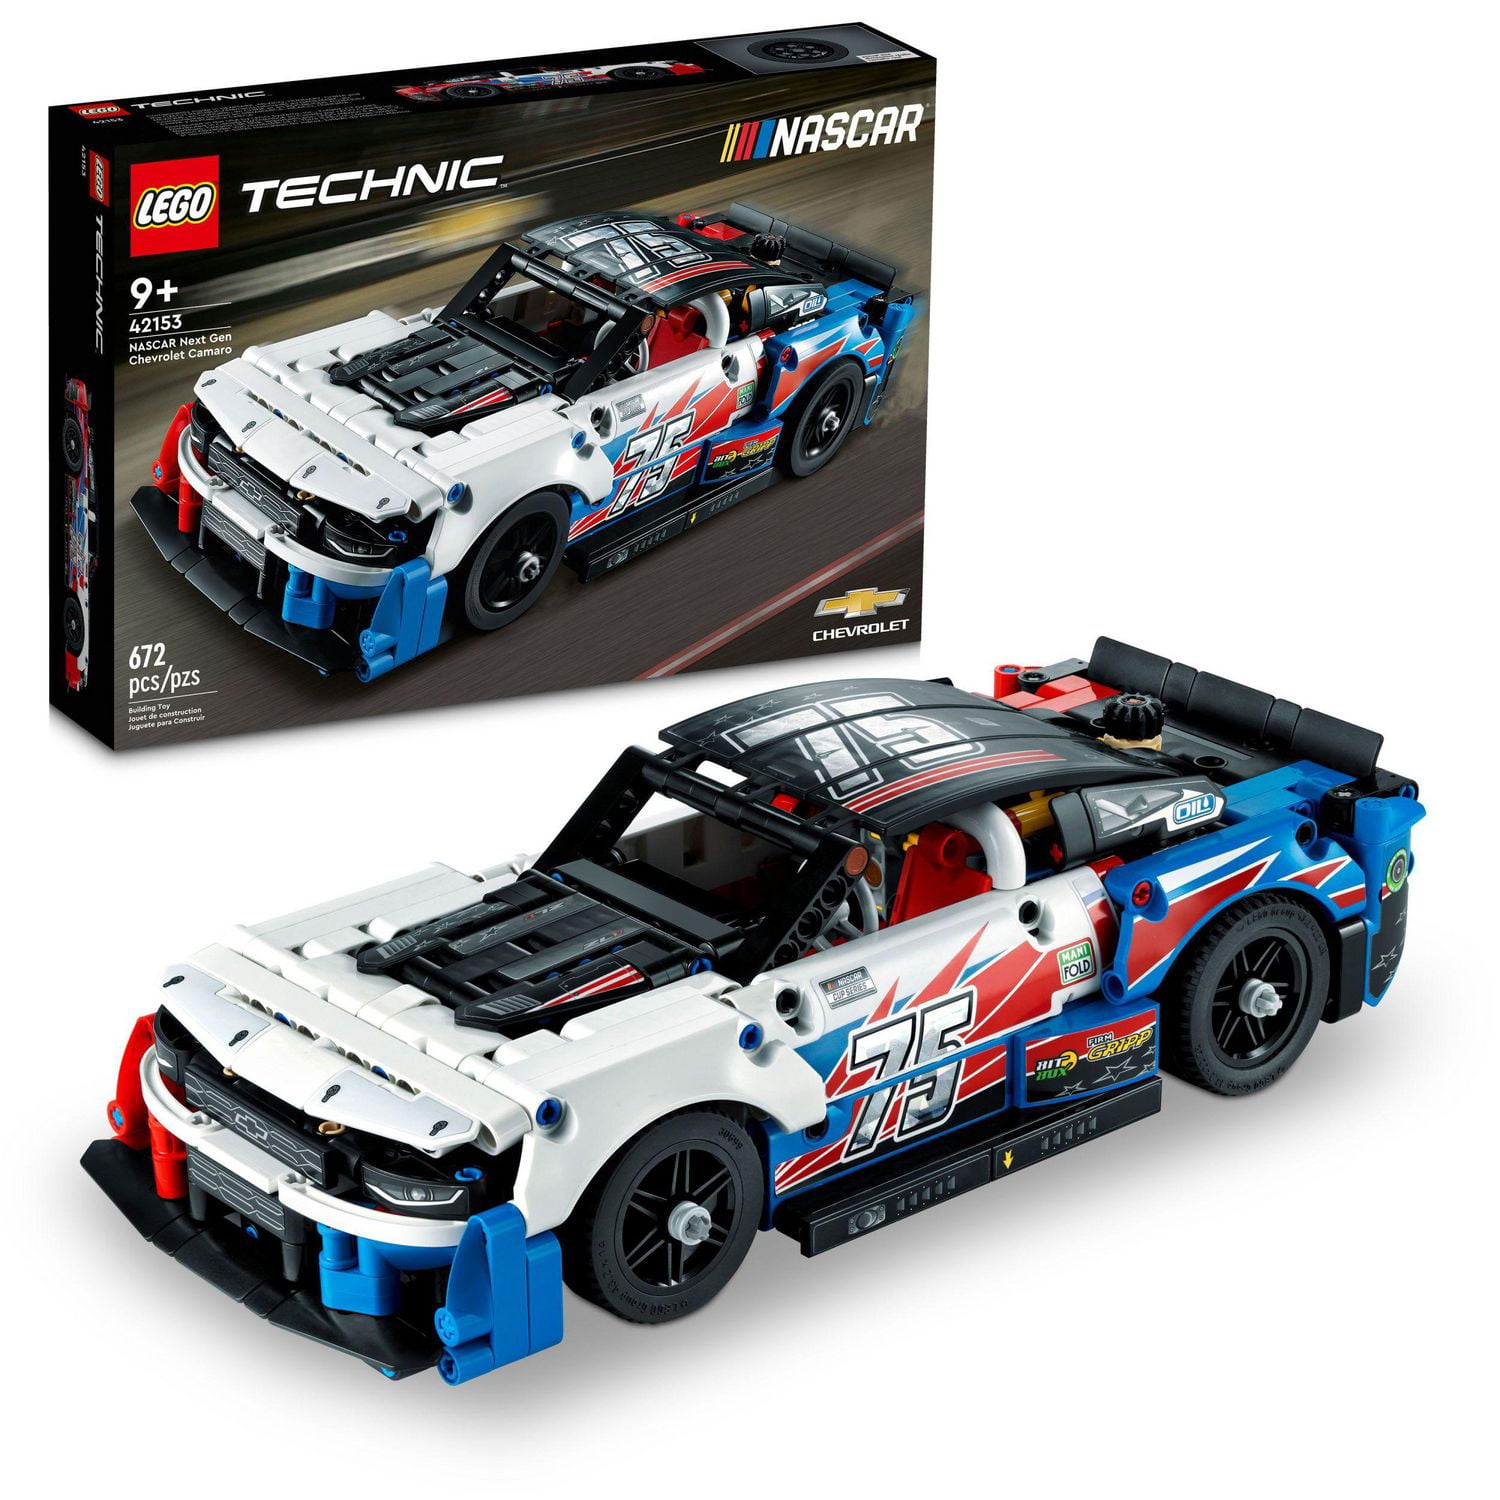 LEGO Technic NASCAR Next Gen Chevrolet Camaro ZL1 Building Set 42153 -  Authentically Designed Collectible Race Car Model Toy Vehicle Kit,  Educational Holiday Toys for Boys, Girls, and Teens Ages 9+, Includes